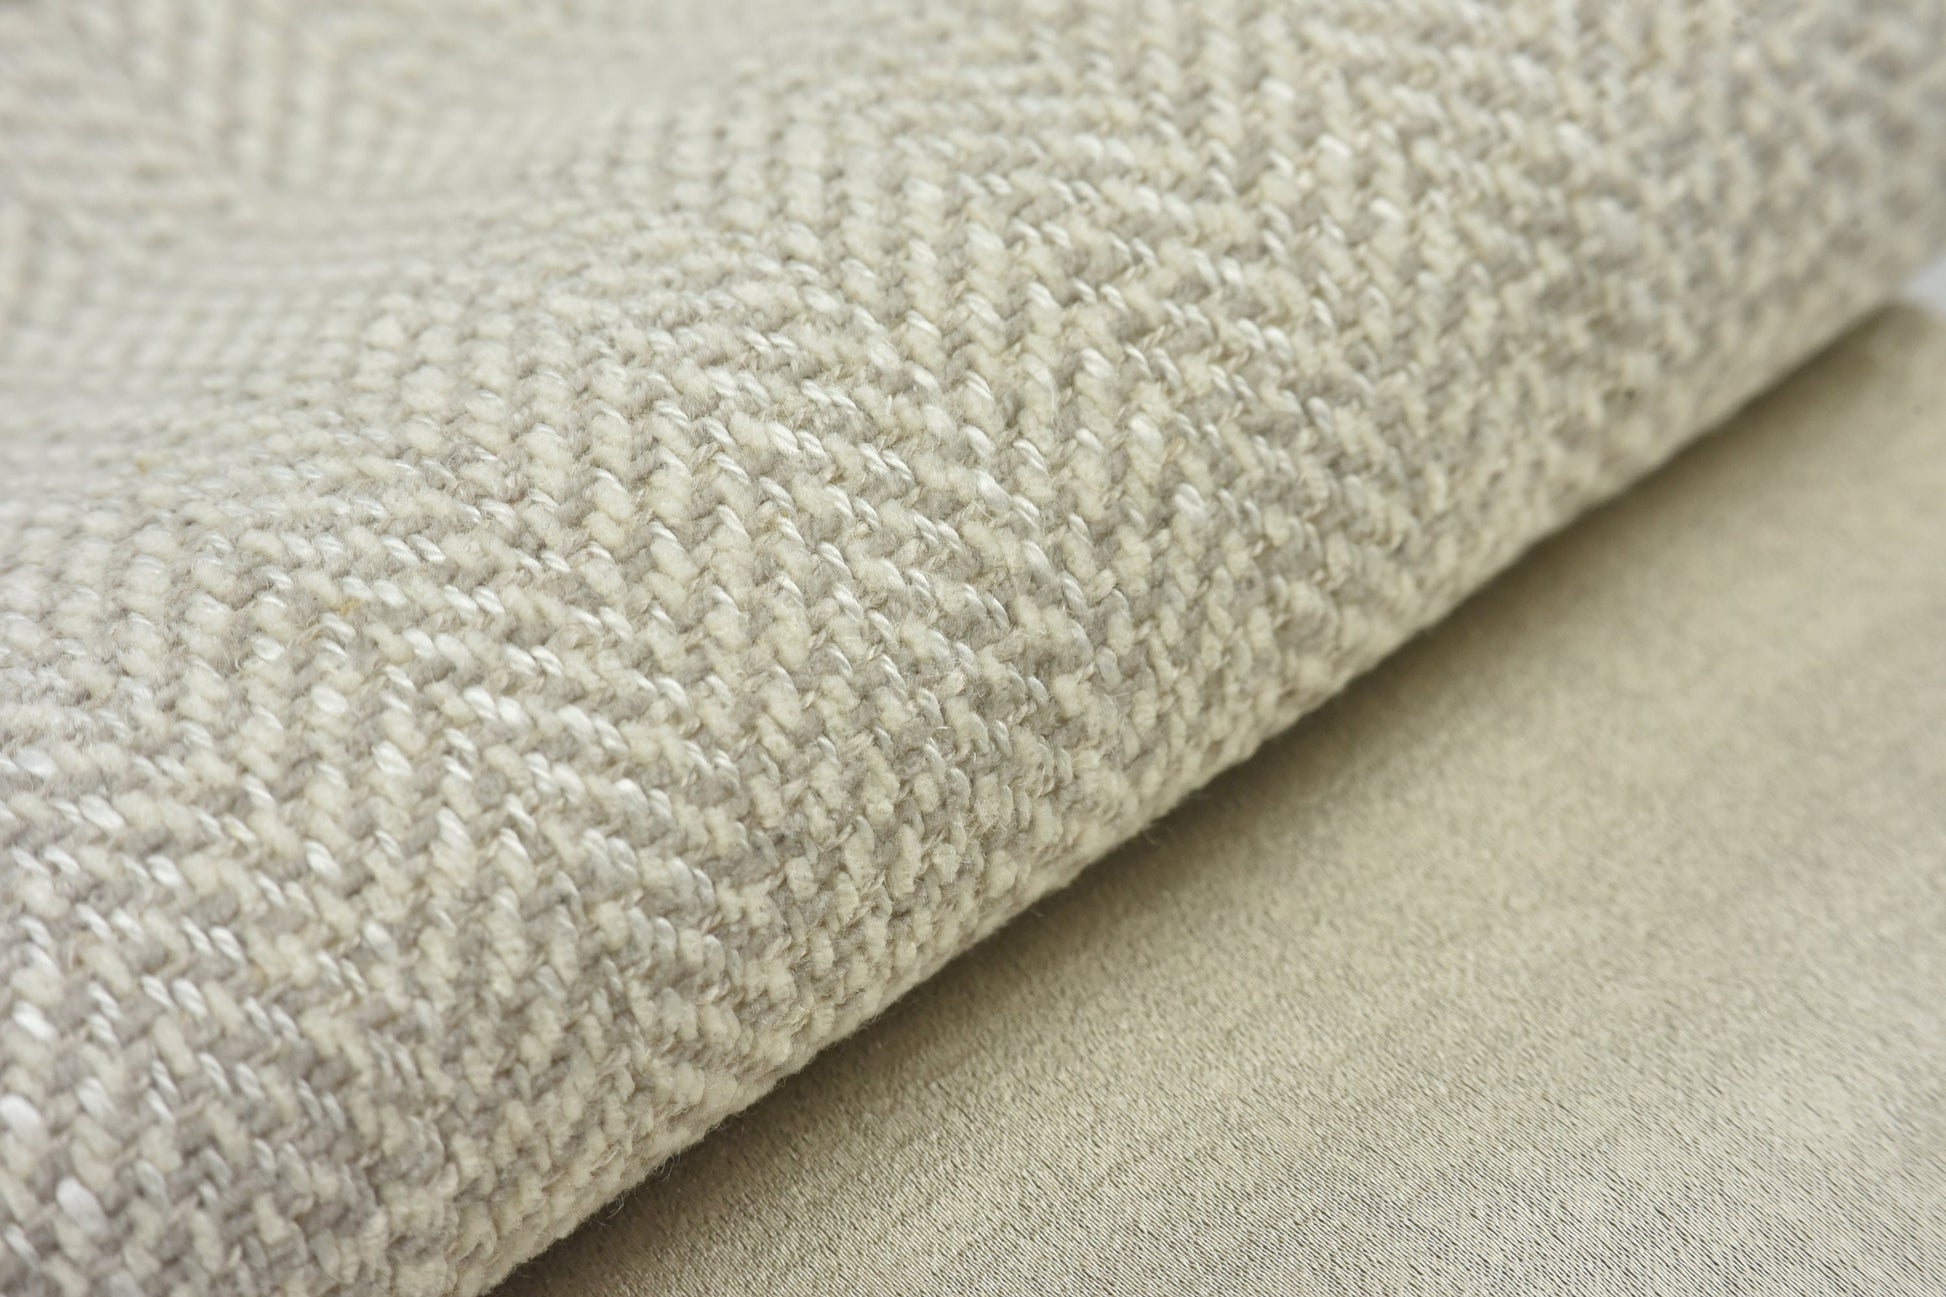 Heavy Weight Vintage Linen Blended Zigzag Taupe White Herringbone Upholstery Fabric By The Yard For Headboard,Cushion,Ottoman,Furniture